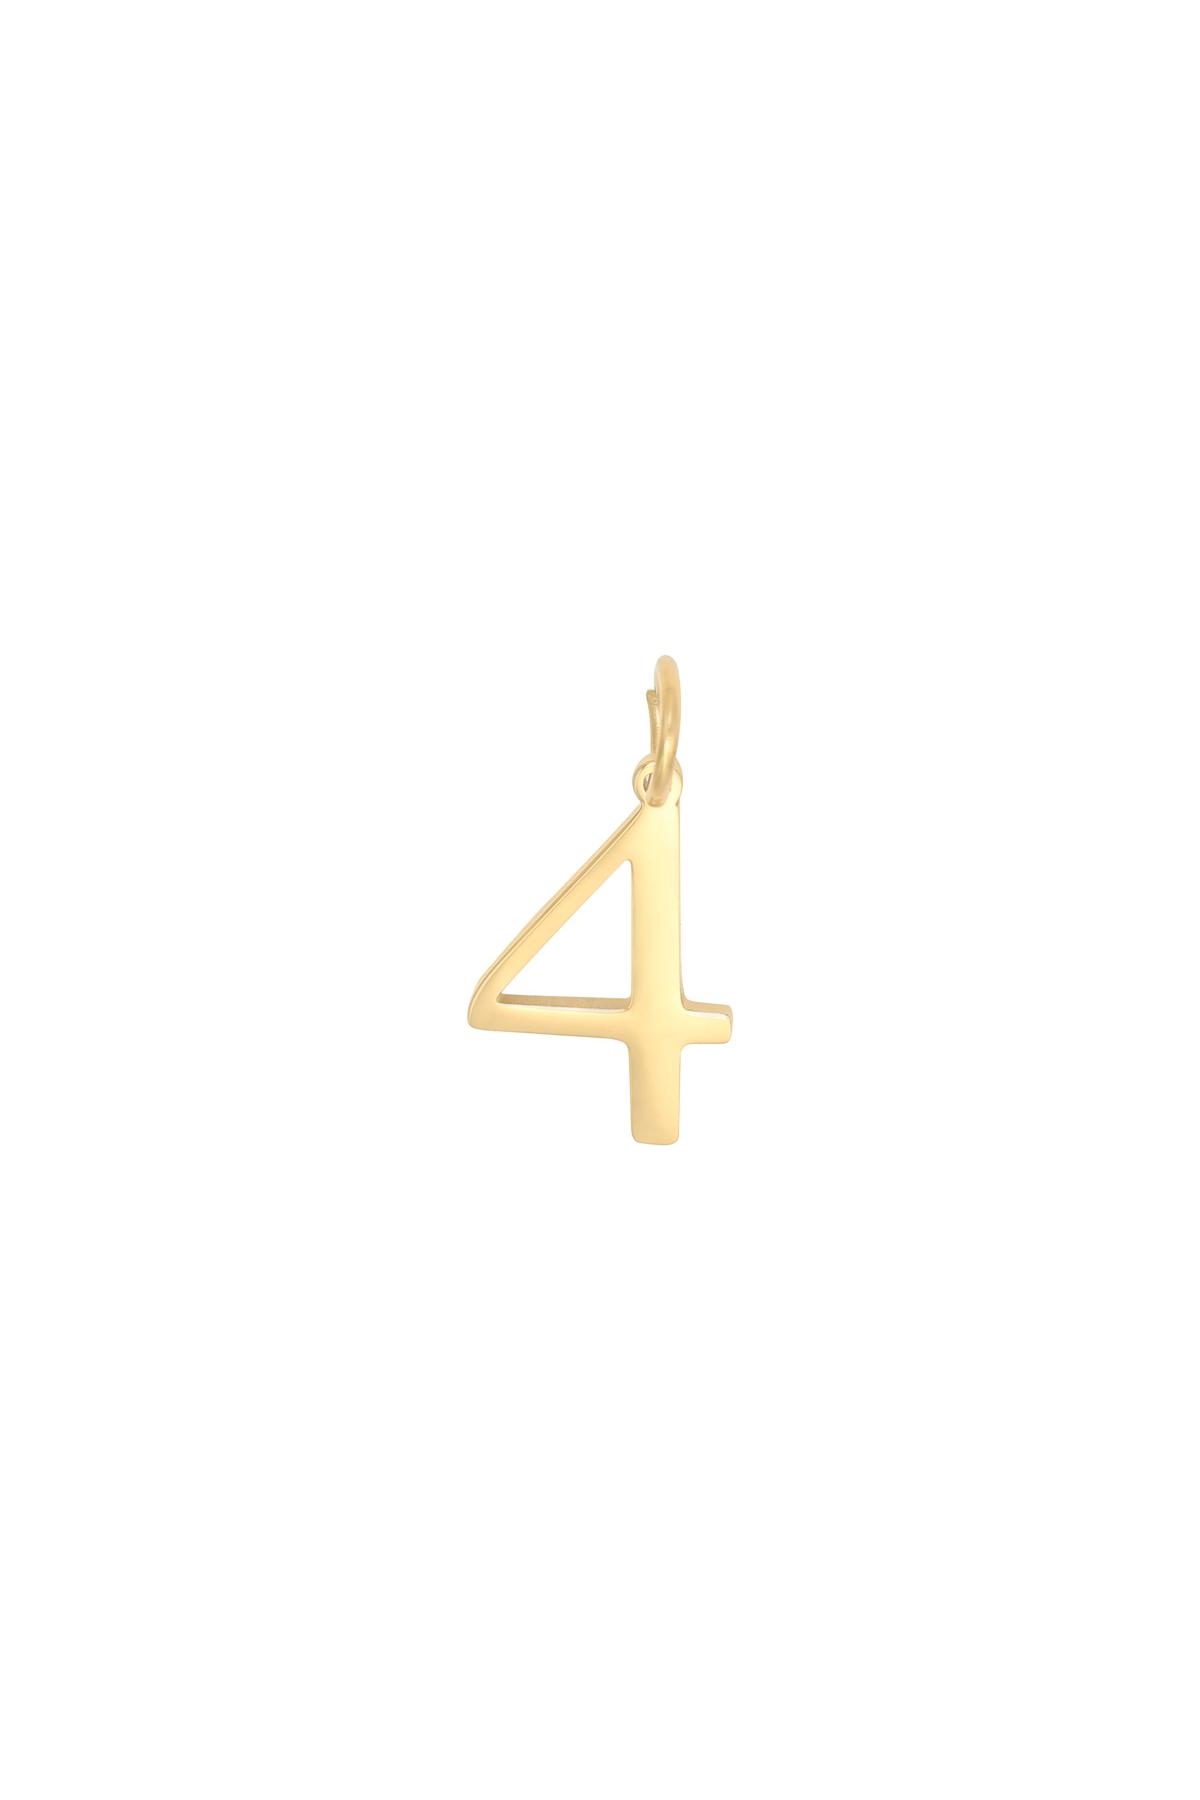 Gold / DIY Charm Digits Gold - 4 Stainless Steel Picture15